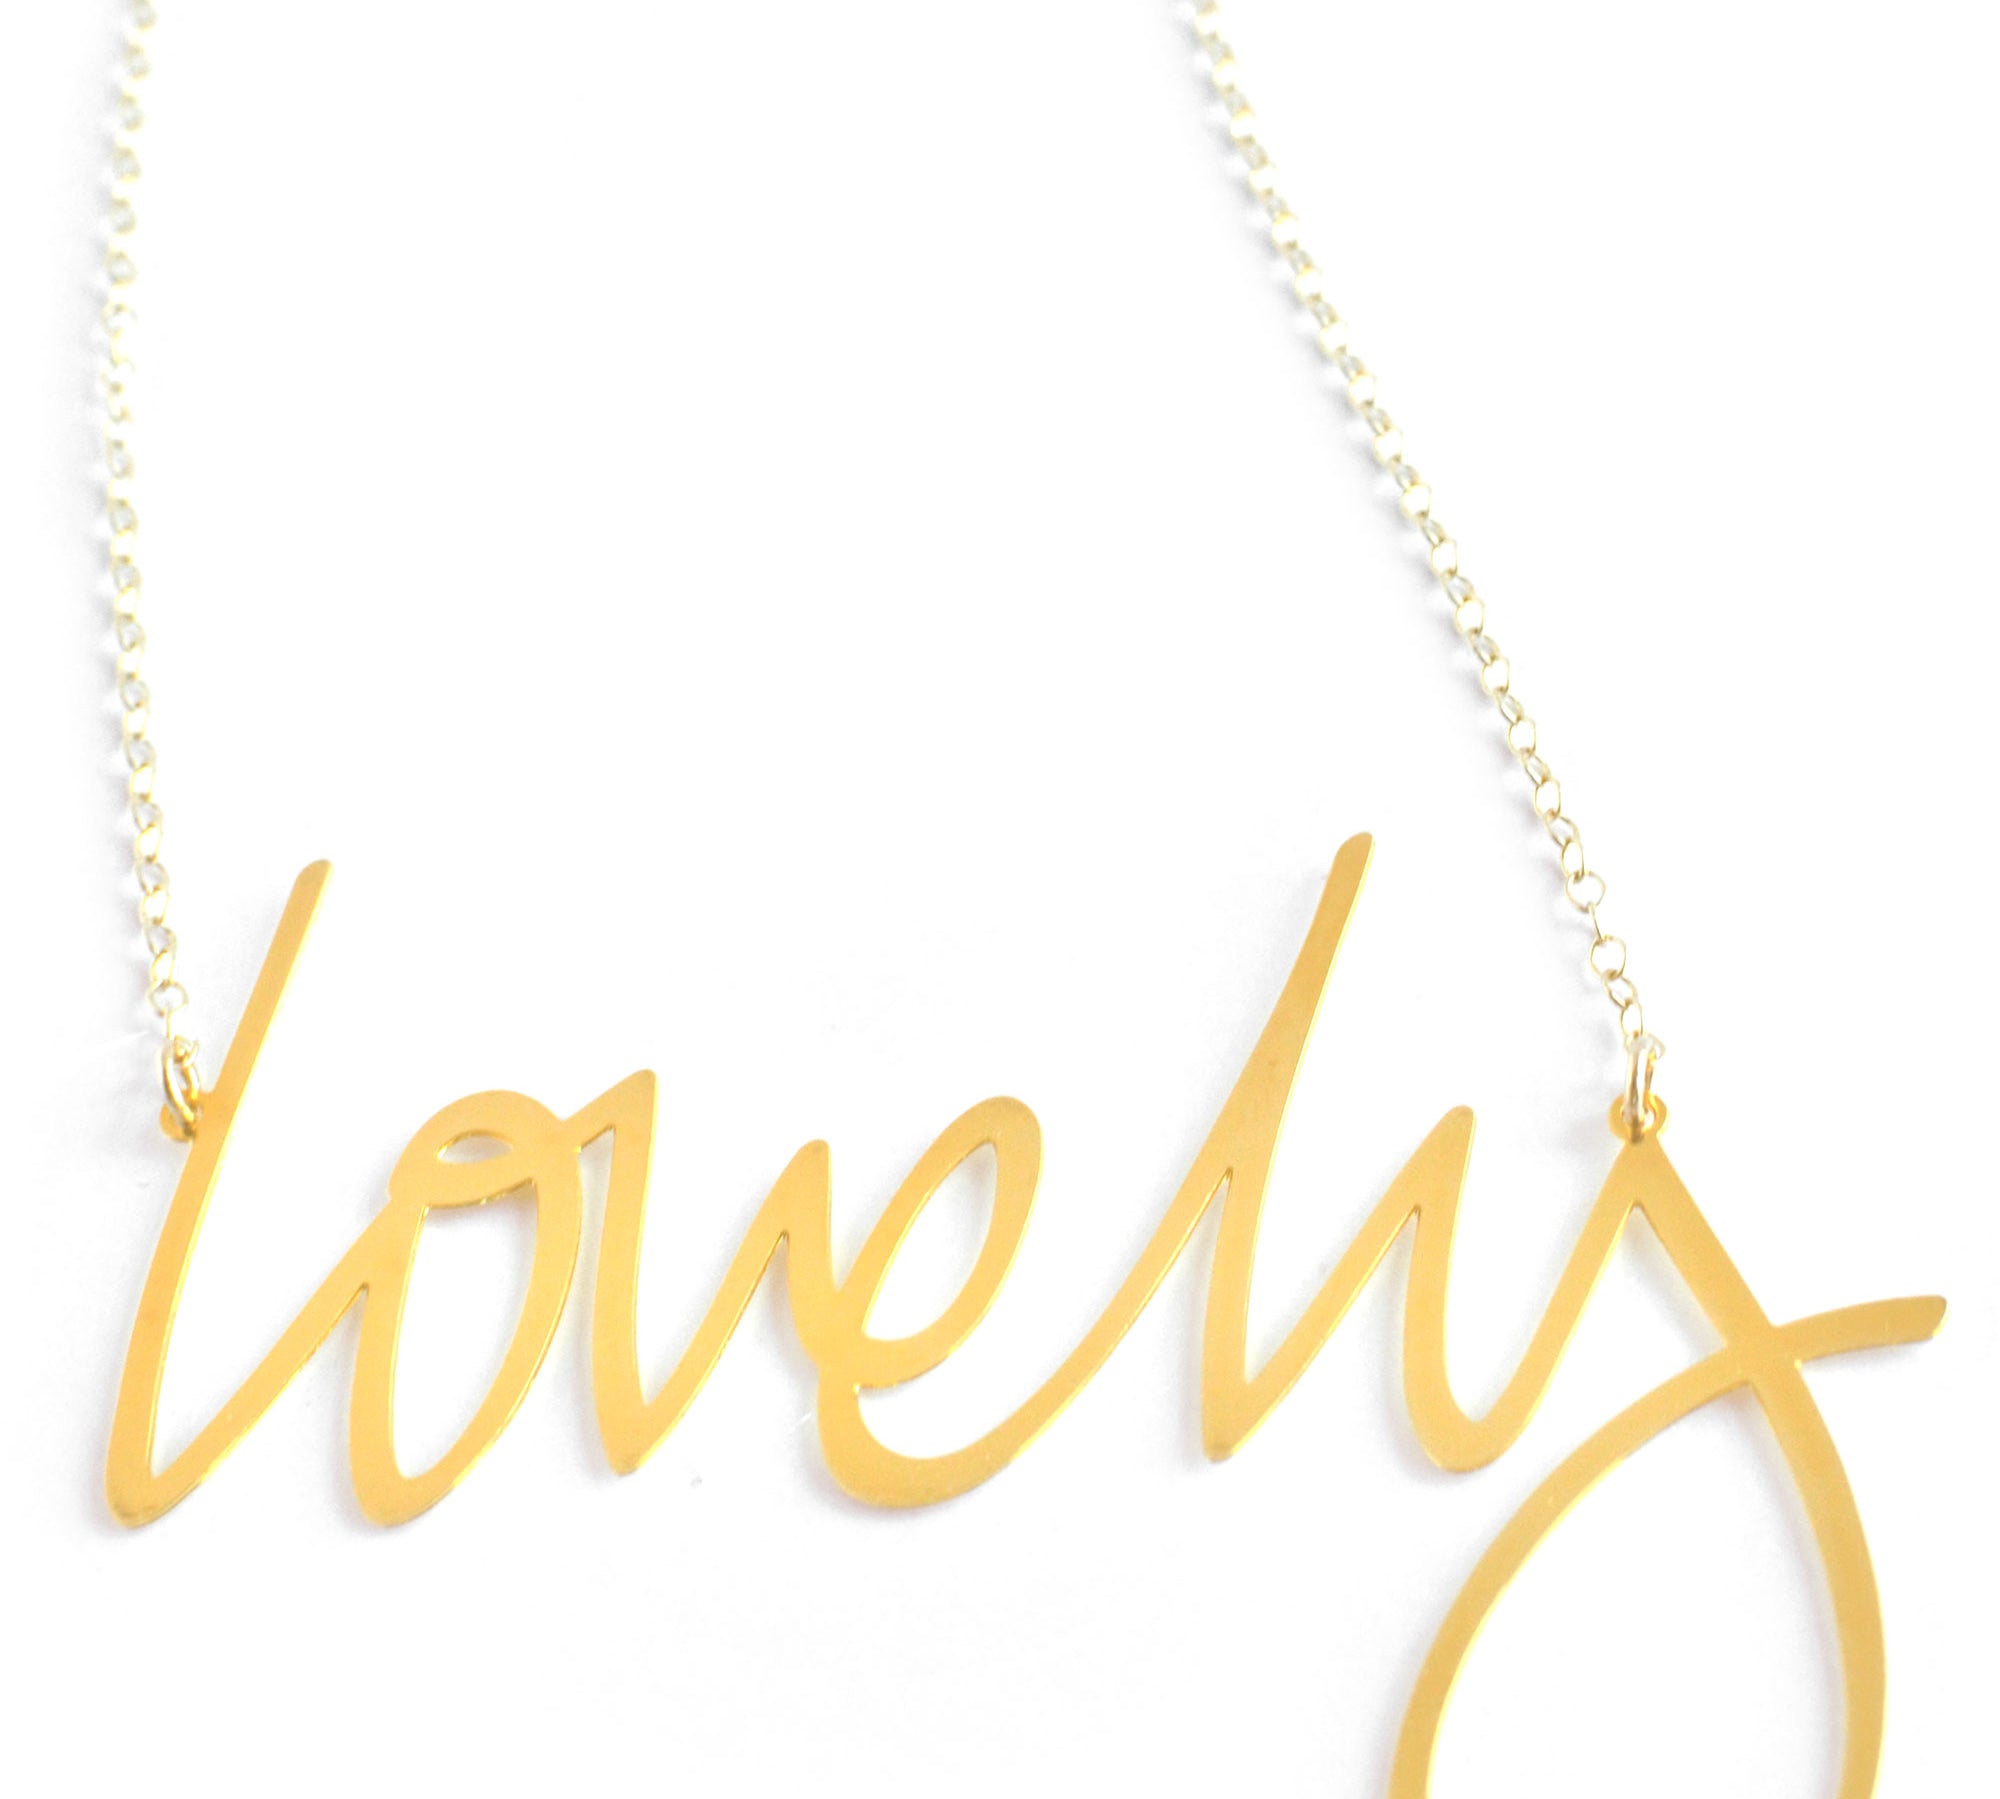 Lovely Necklace - High Quality, Affordable, Hand Written, Self Love, Mantra Word Necklace - Available in Gold and Silver - Small and Large Sizes - Made in USA - Brevity Jewelry